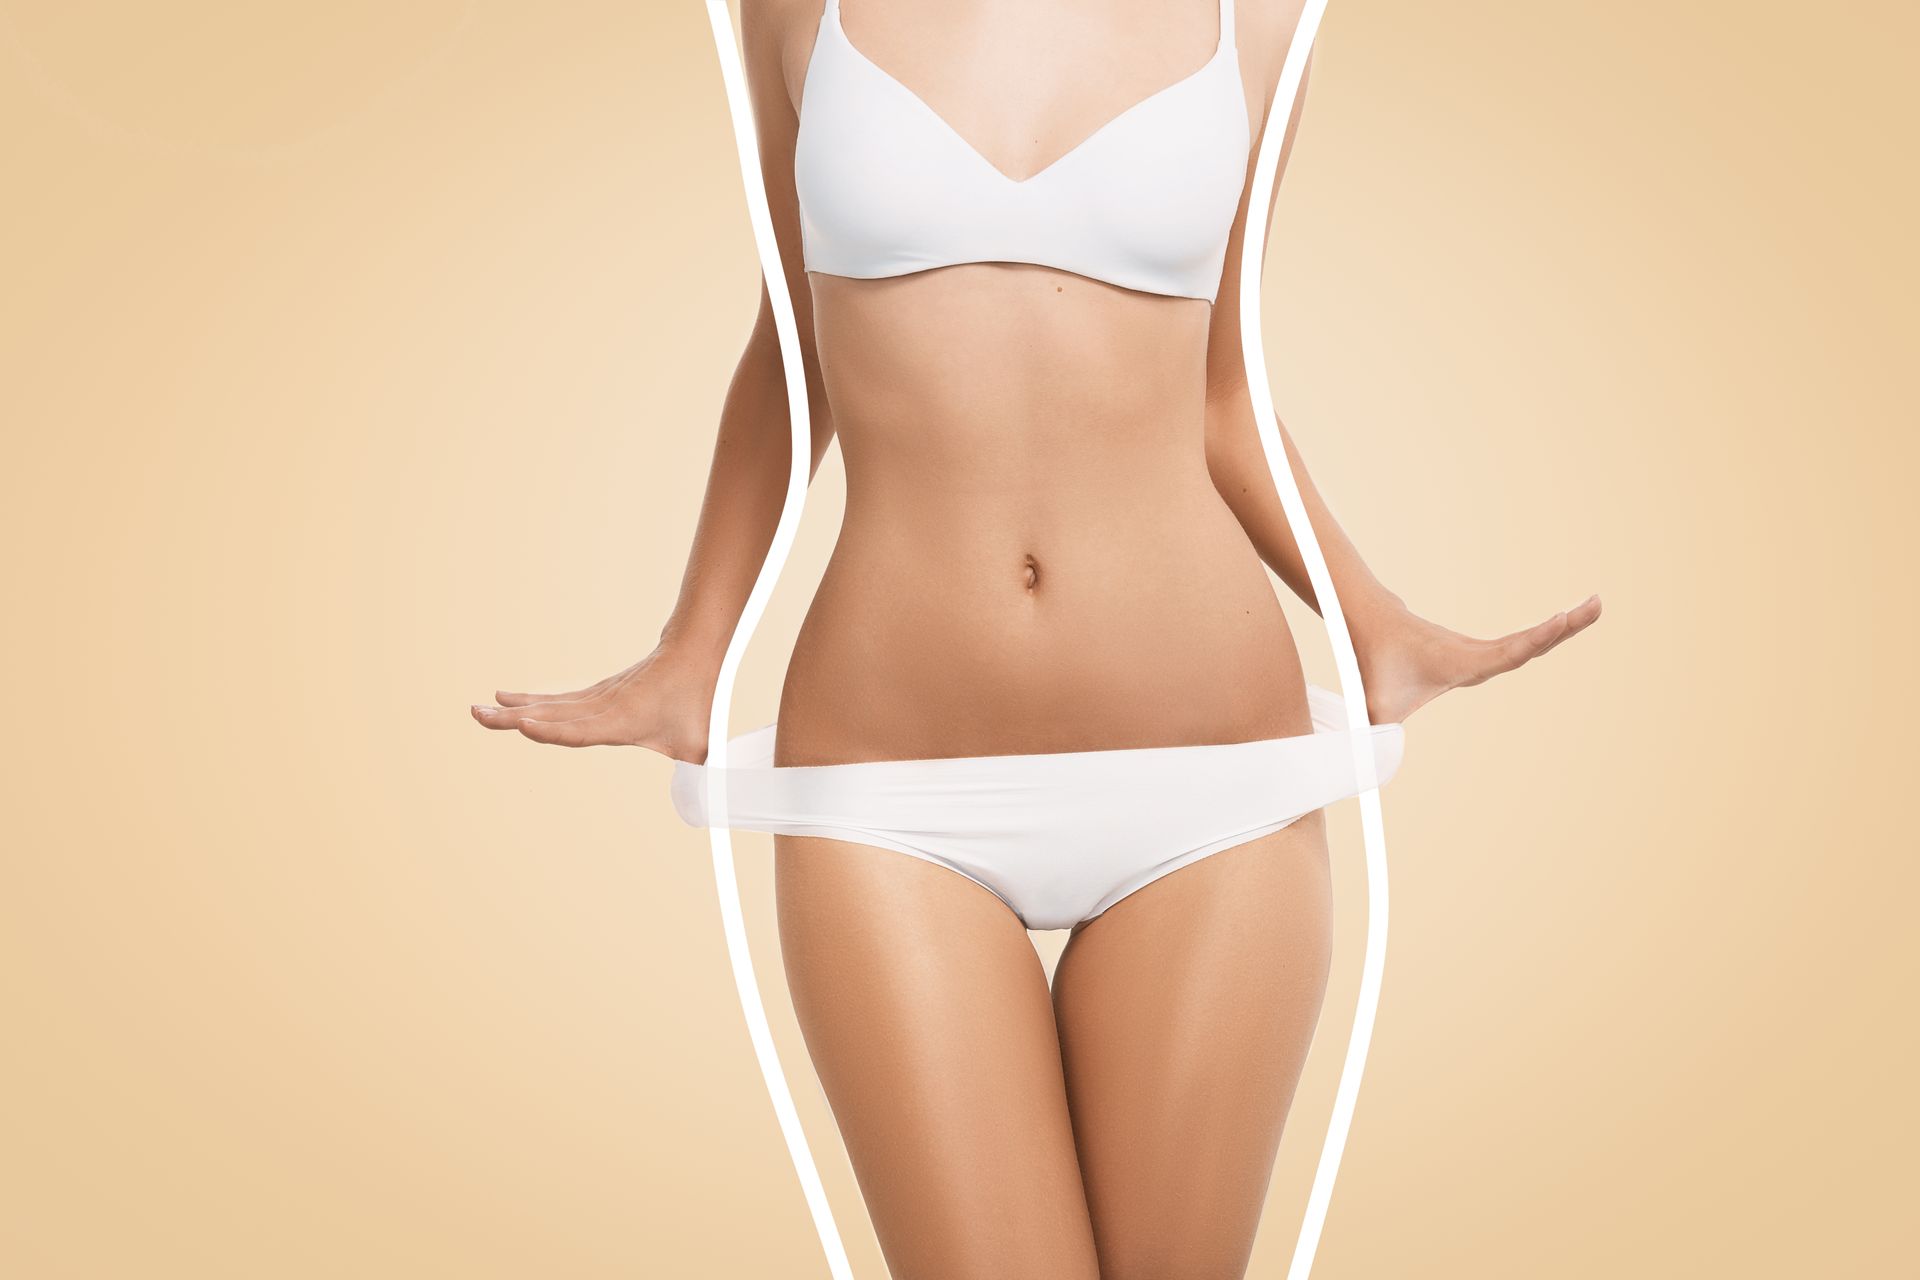 A woman in a white bikini is standing in front of a beige background.